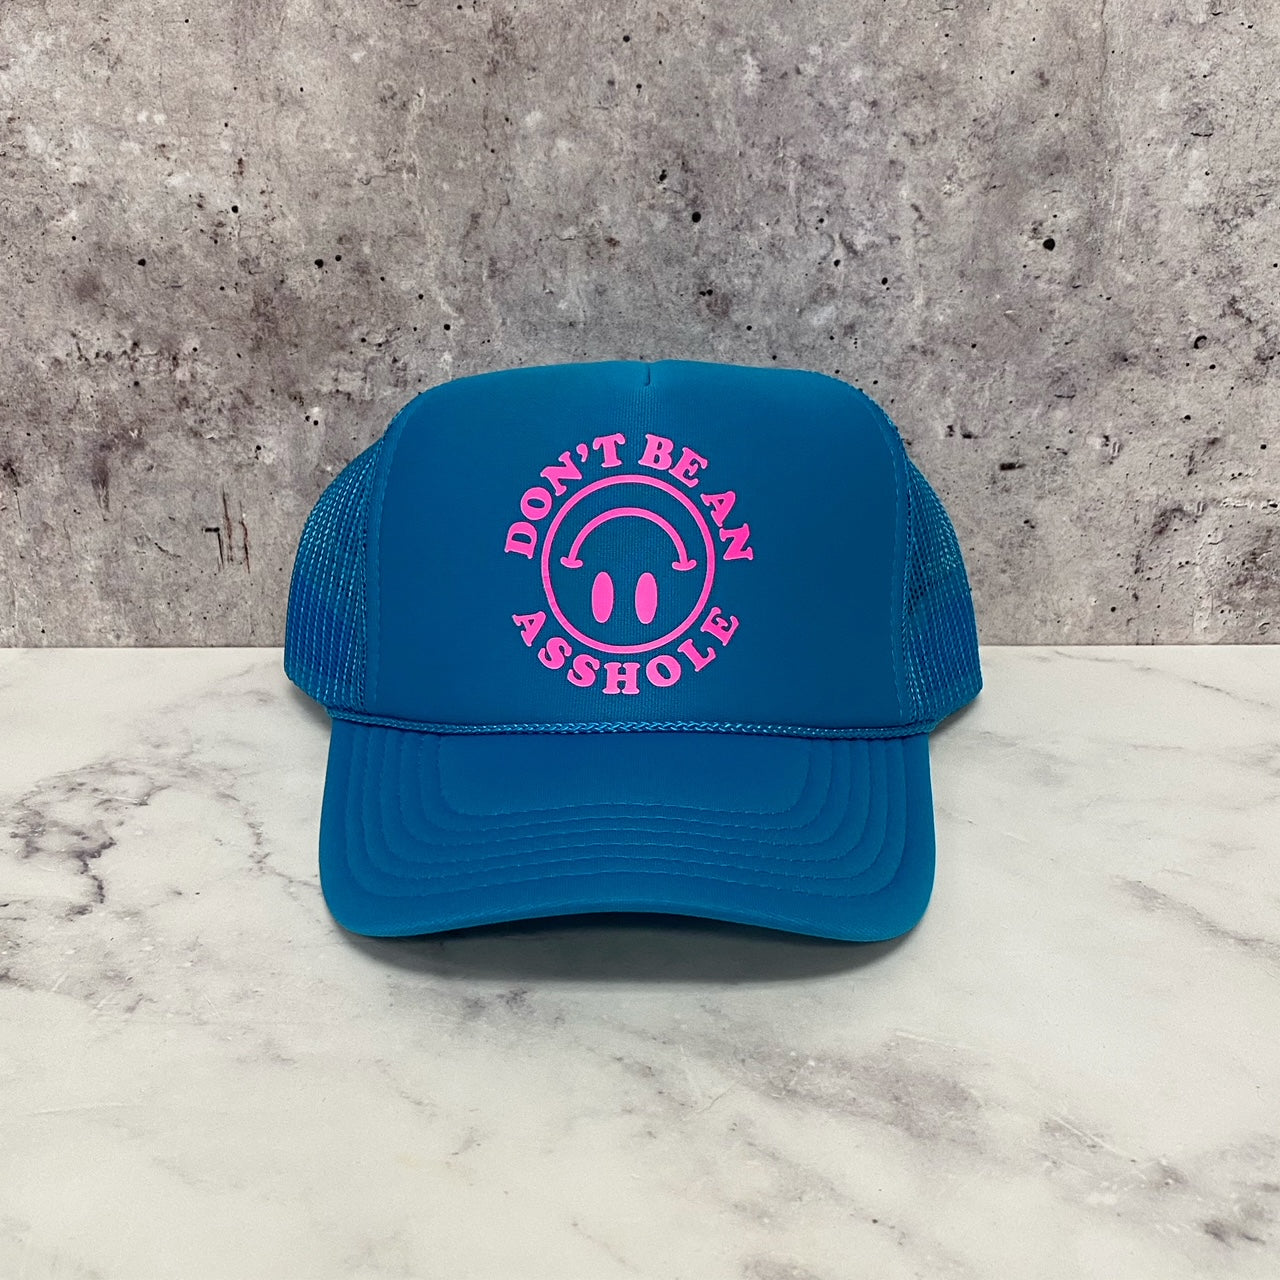 Dont Be An A**hole Trucker Hat